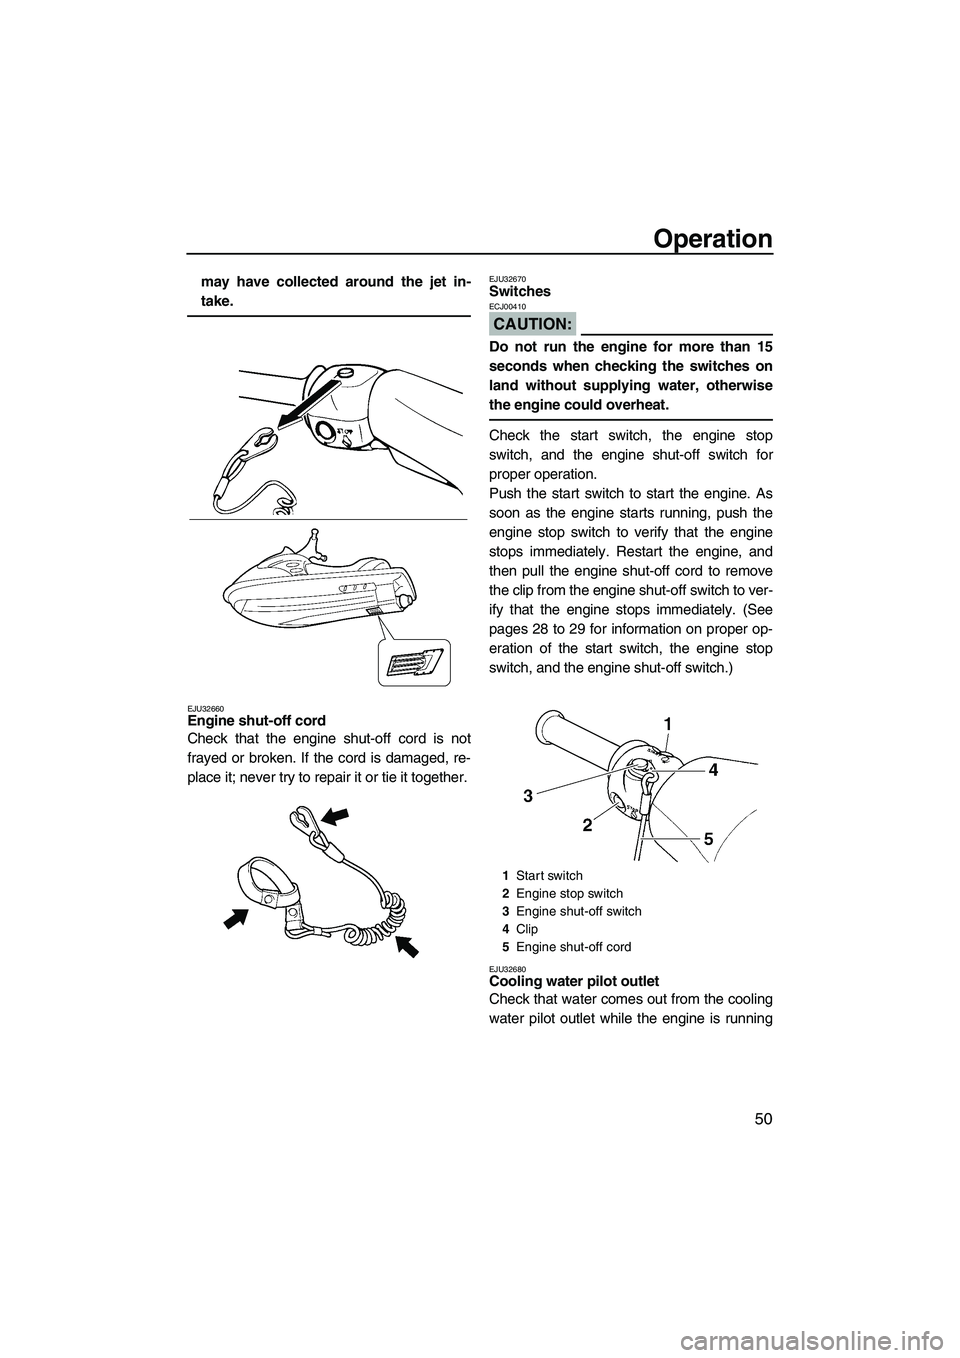 YAMAHA VX 2007  Owners Manual Operation
50
may have collected around the jet in-
take.
EJU32660Engine shut-off cord 
Check that the engine shut-off cord is not
frayed or broken. If the cord is damaged, re-
place it; never try to r